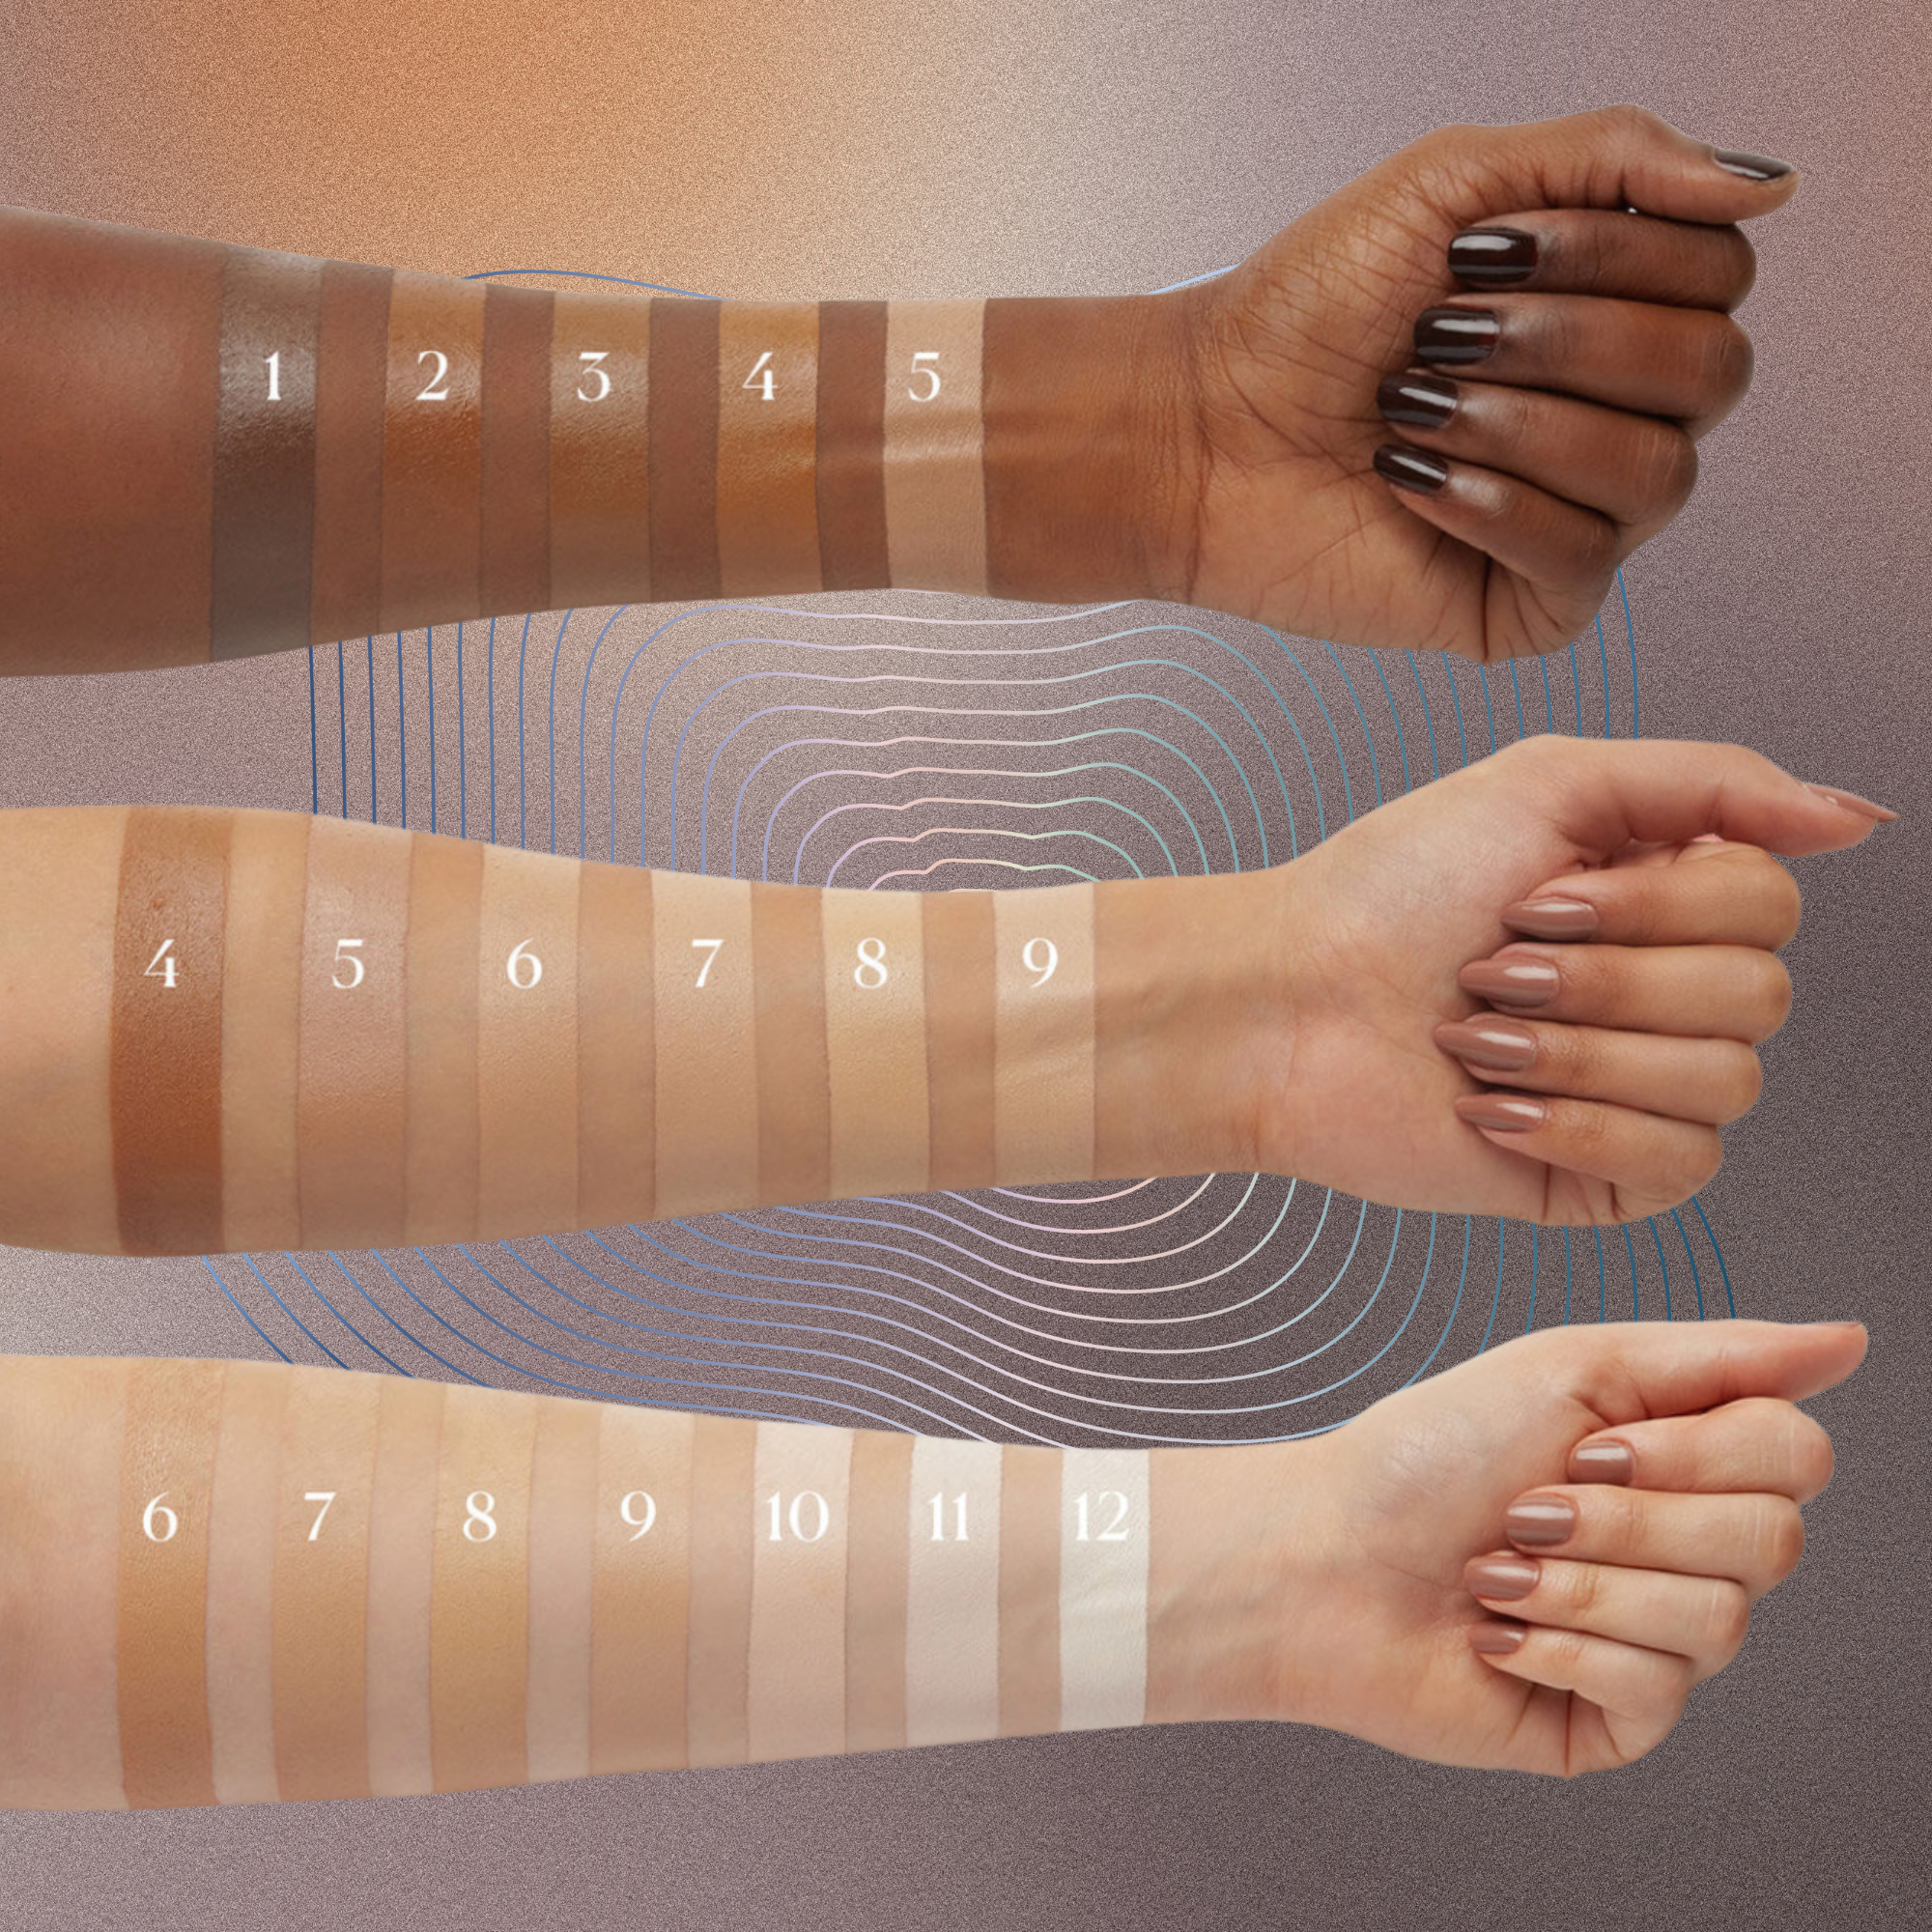 Beauty Brands With A Wide Range Of Foundation Shades